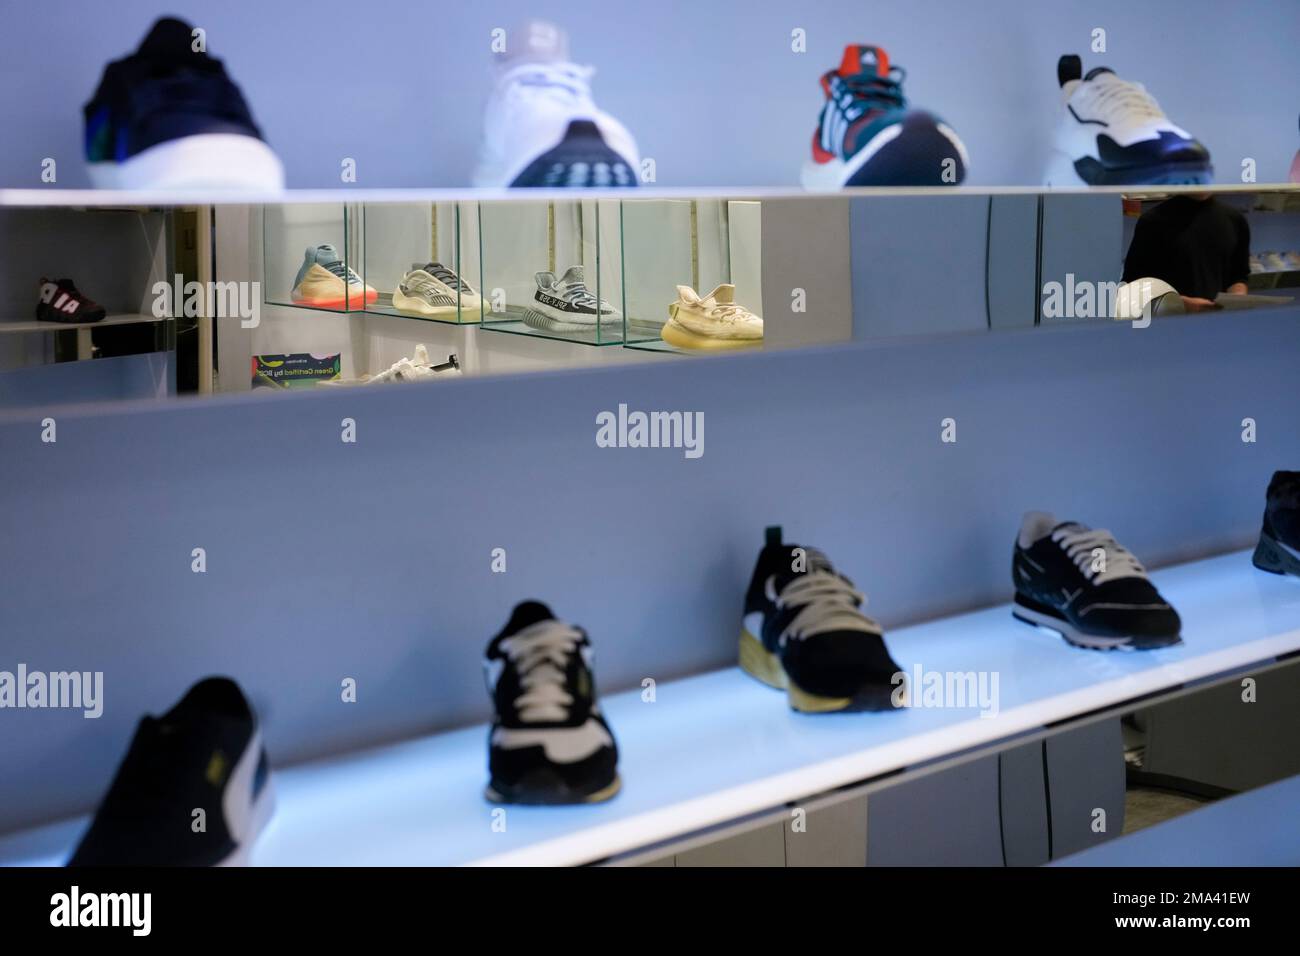 Yeezy shoes made by Adidas displayed inside cases are reflected in a mirror other shoes, at Addict shoe in Brickell City Center in Miami, Tuesday, Oct. 25, 2022. (AP Photo/Rebecca